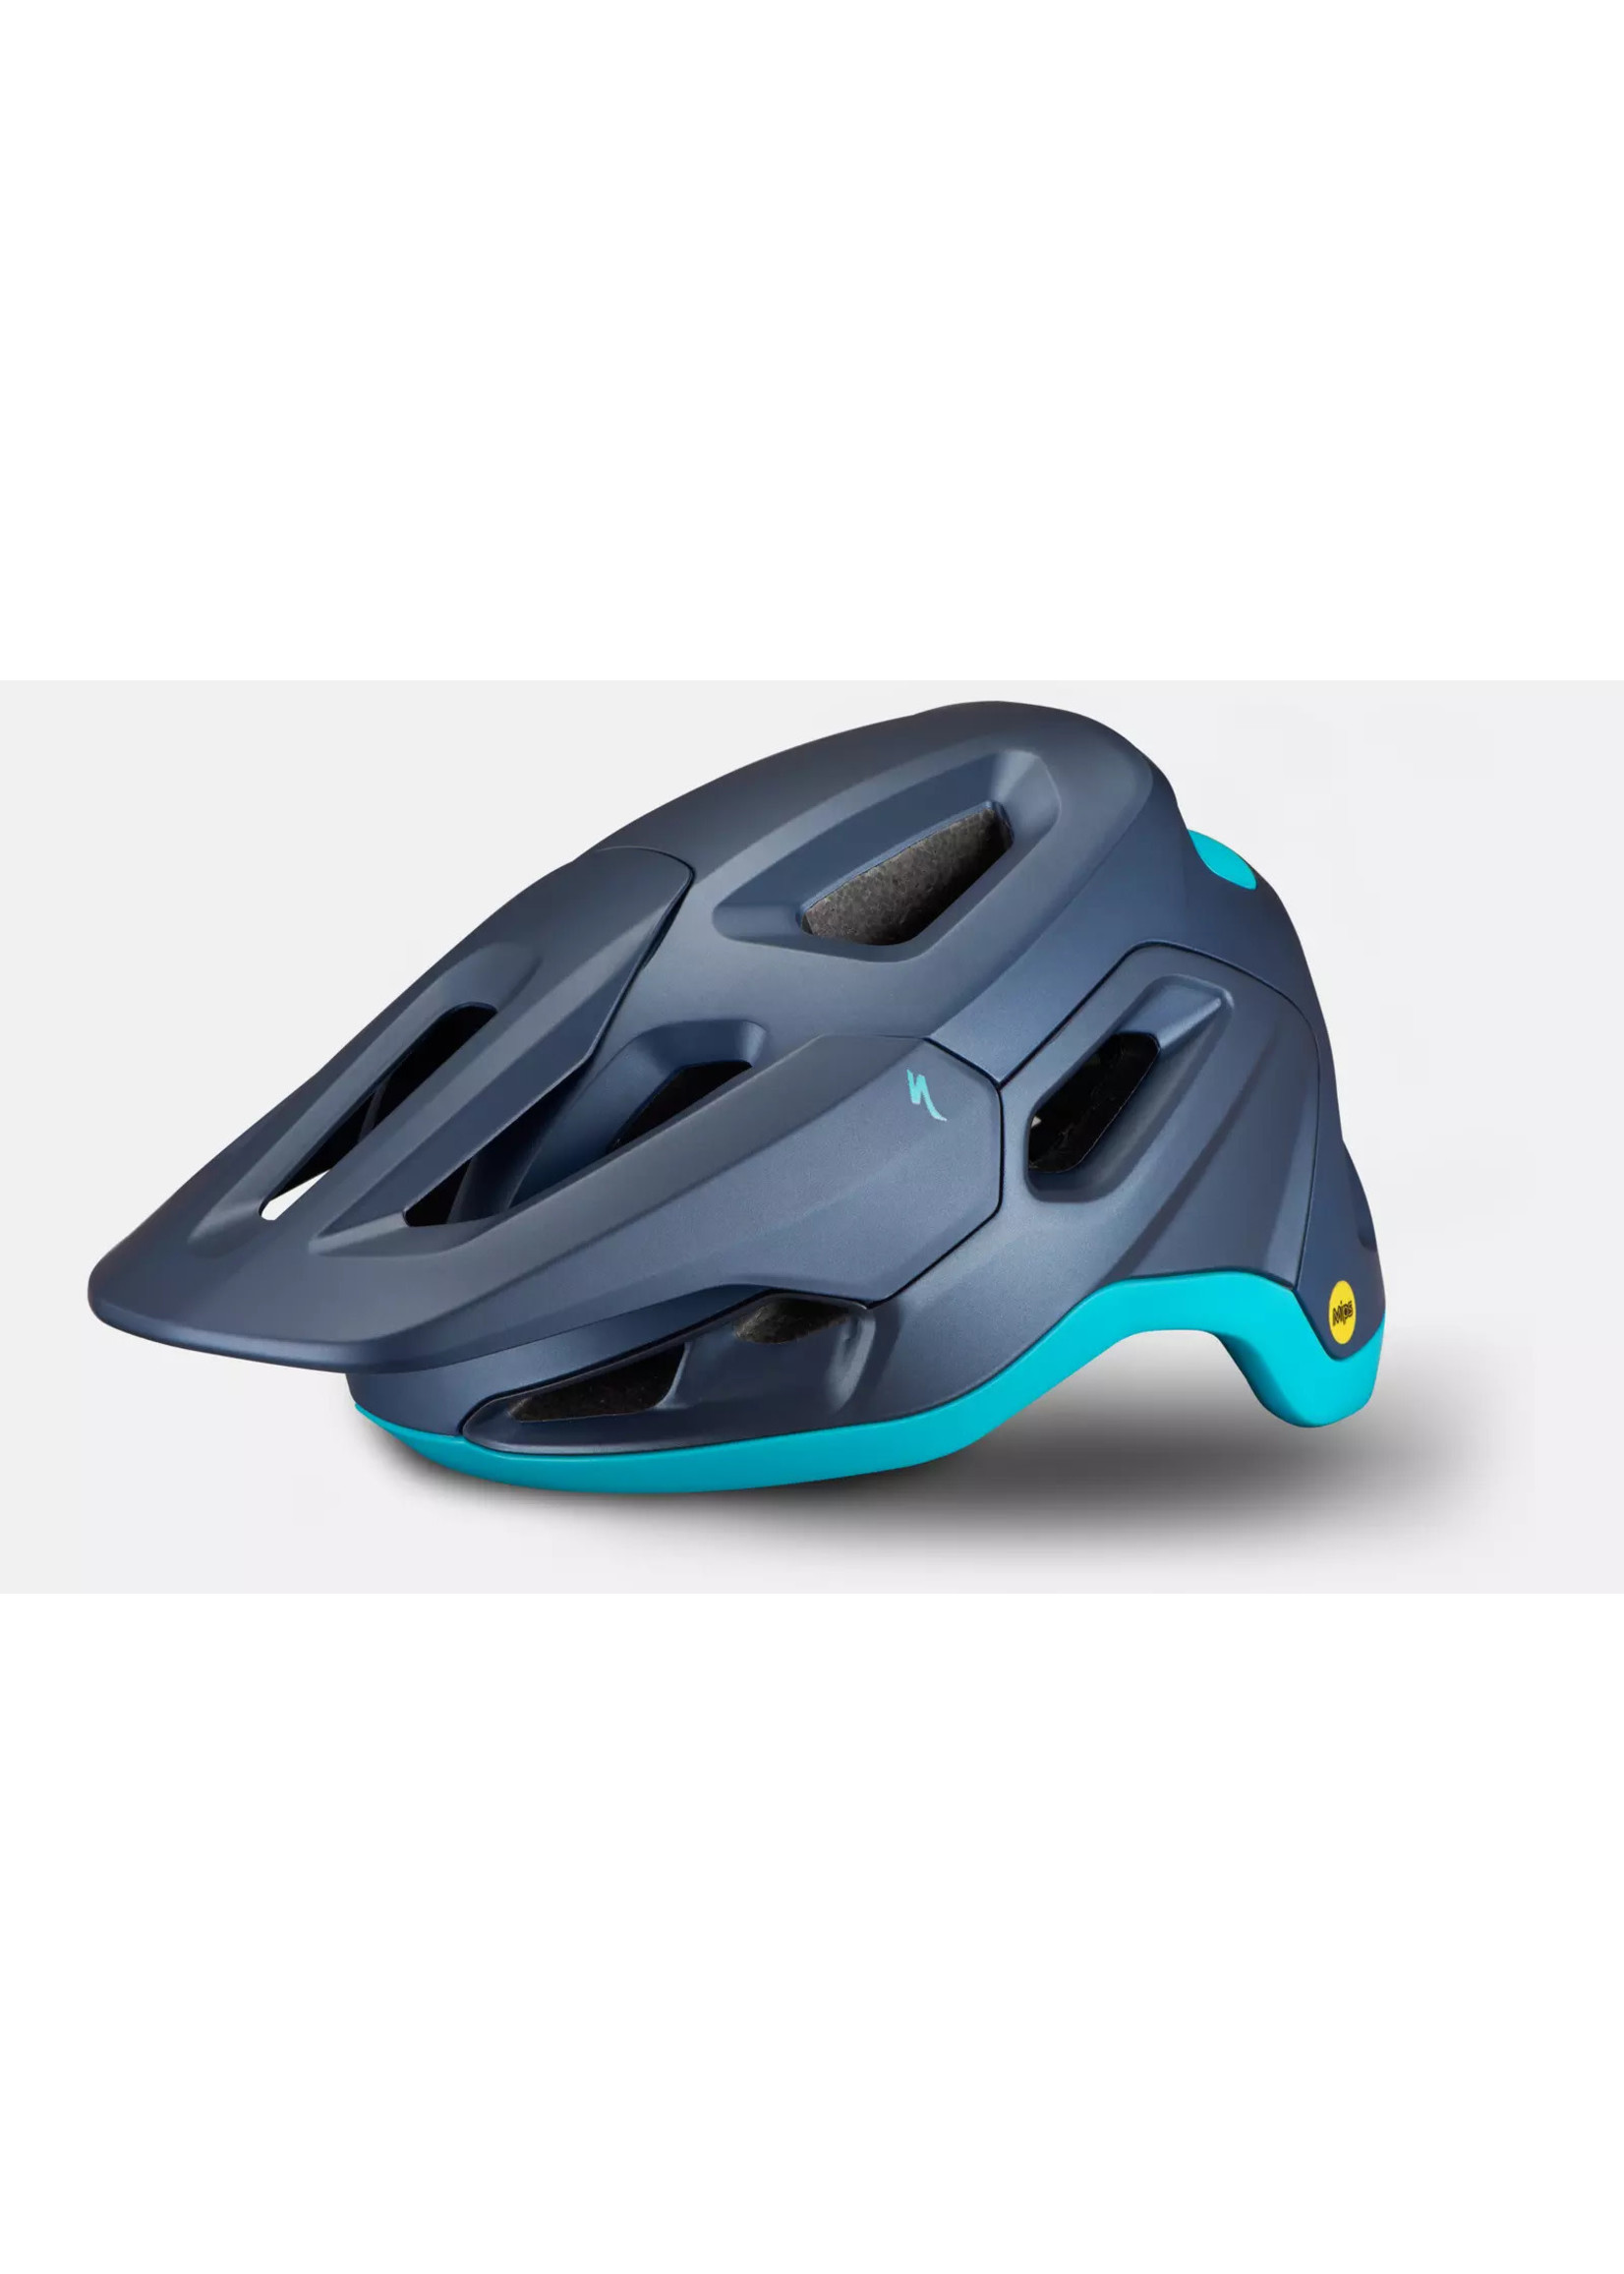 Specialized Specialized Tactic 4 Helmet (Angi Ready)